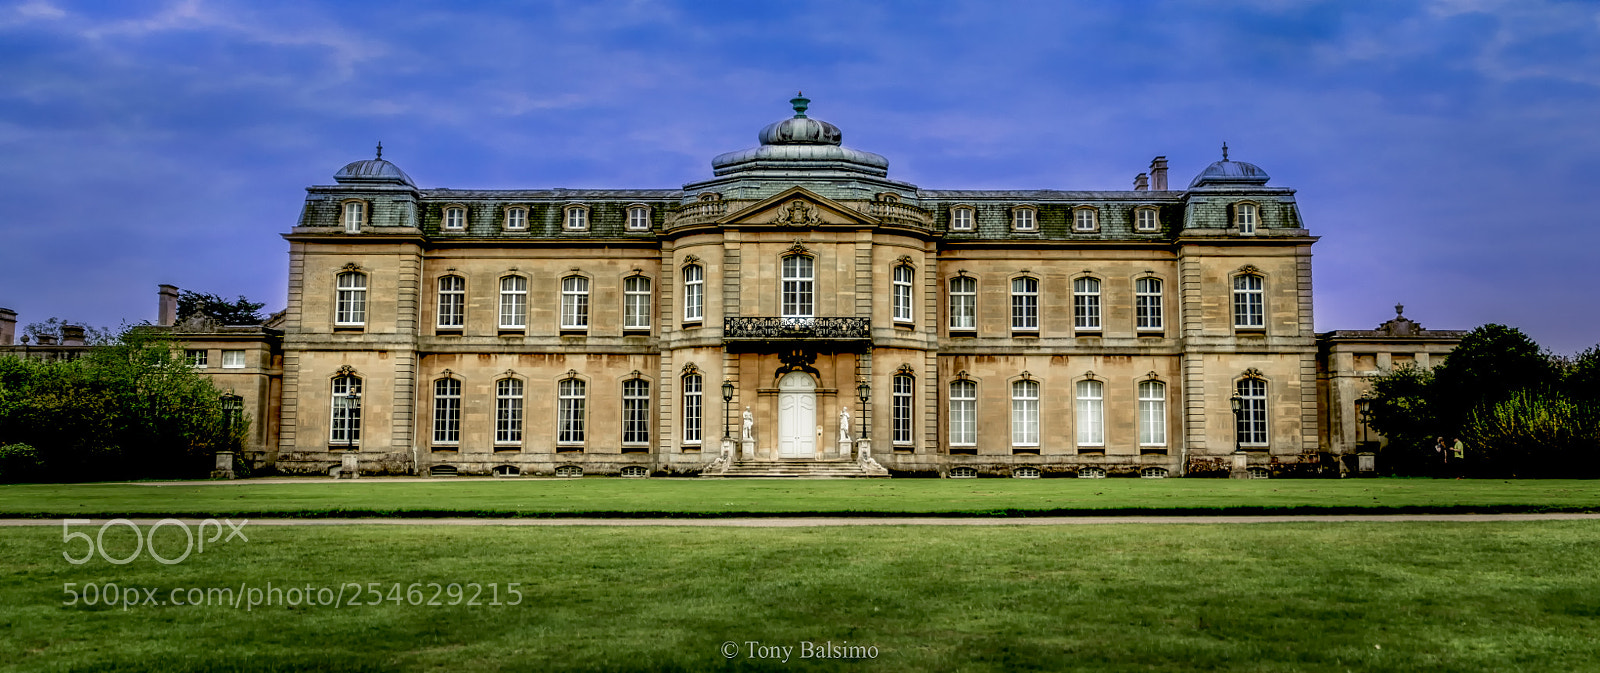 Sony a6300 sample photo. Wrest park mansion photography